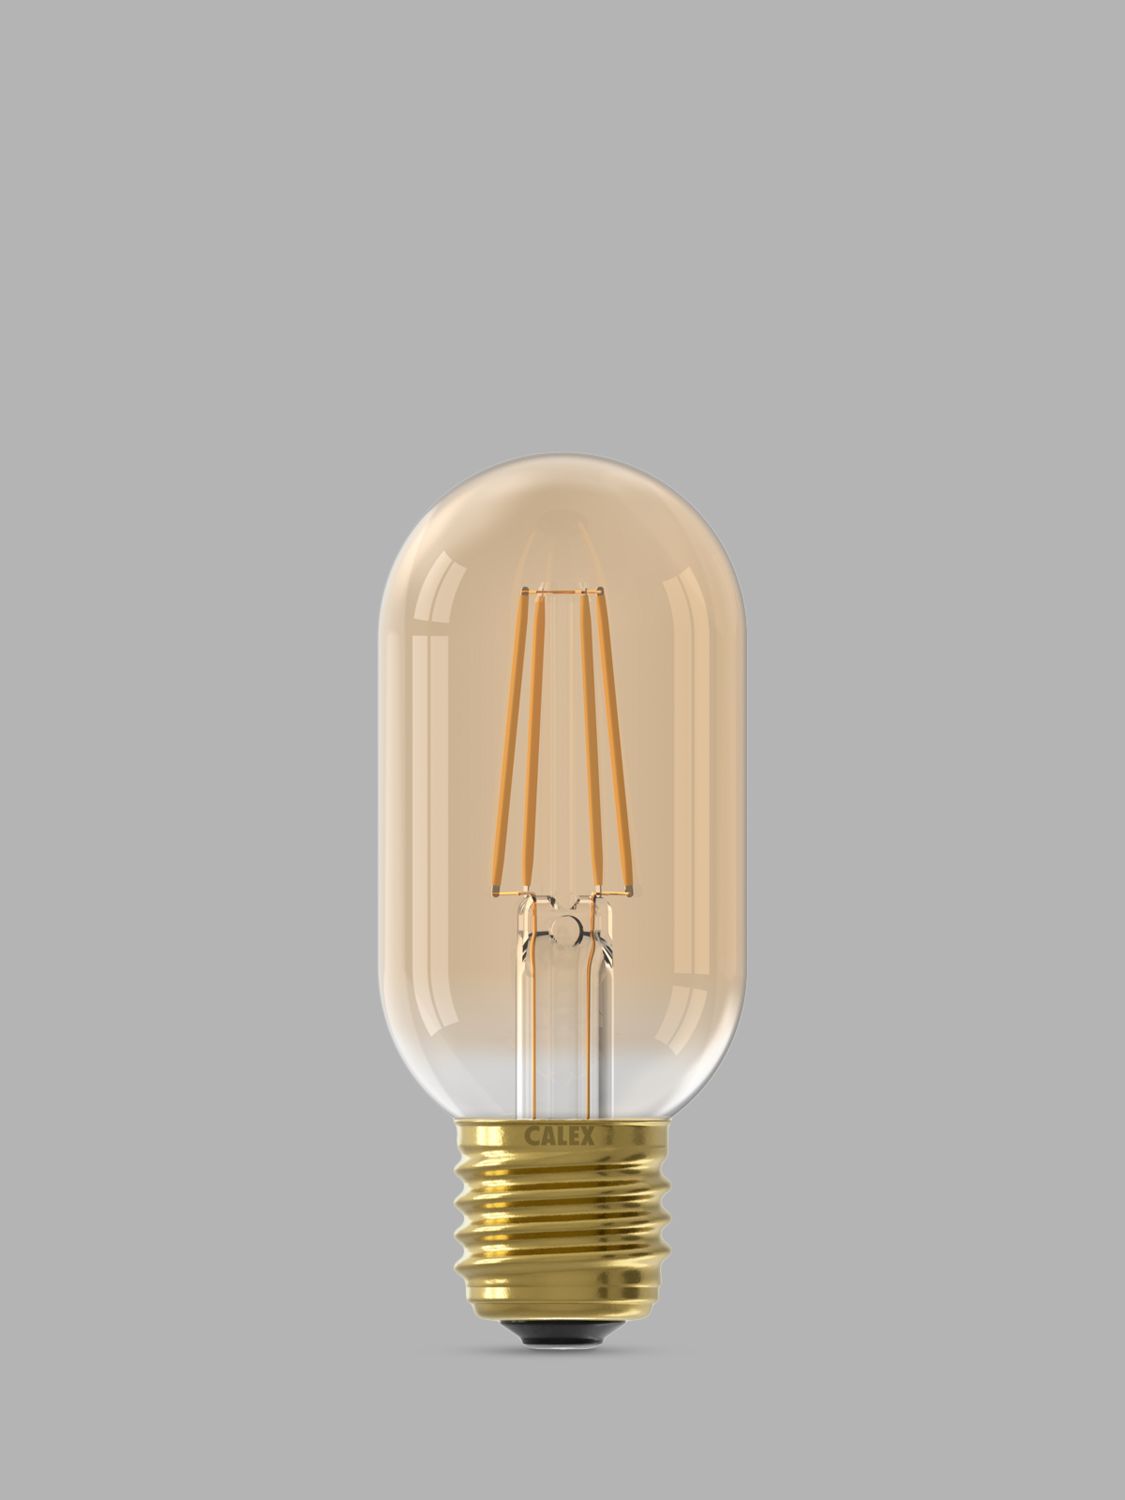 Photo of Calex 3.5w es led dimmable t45 bulb gold